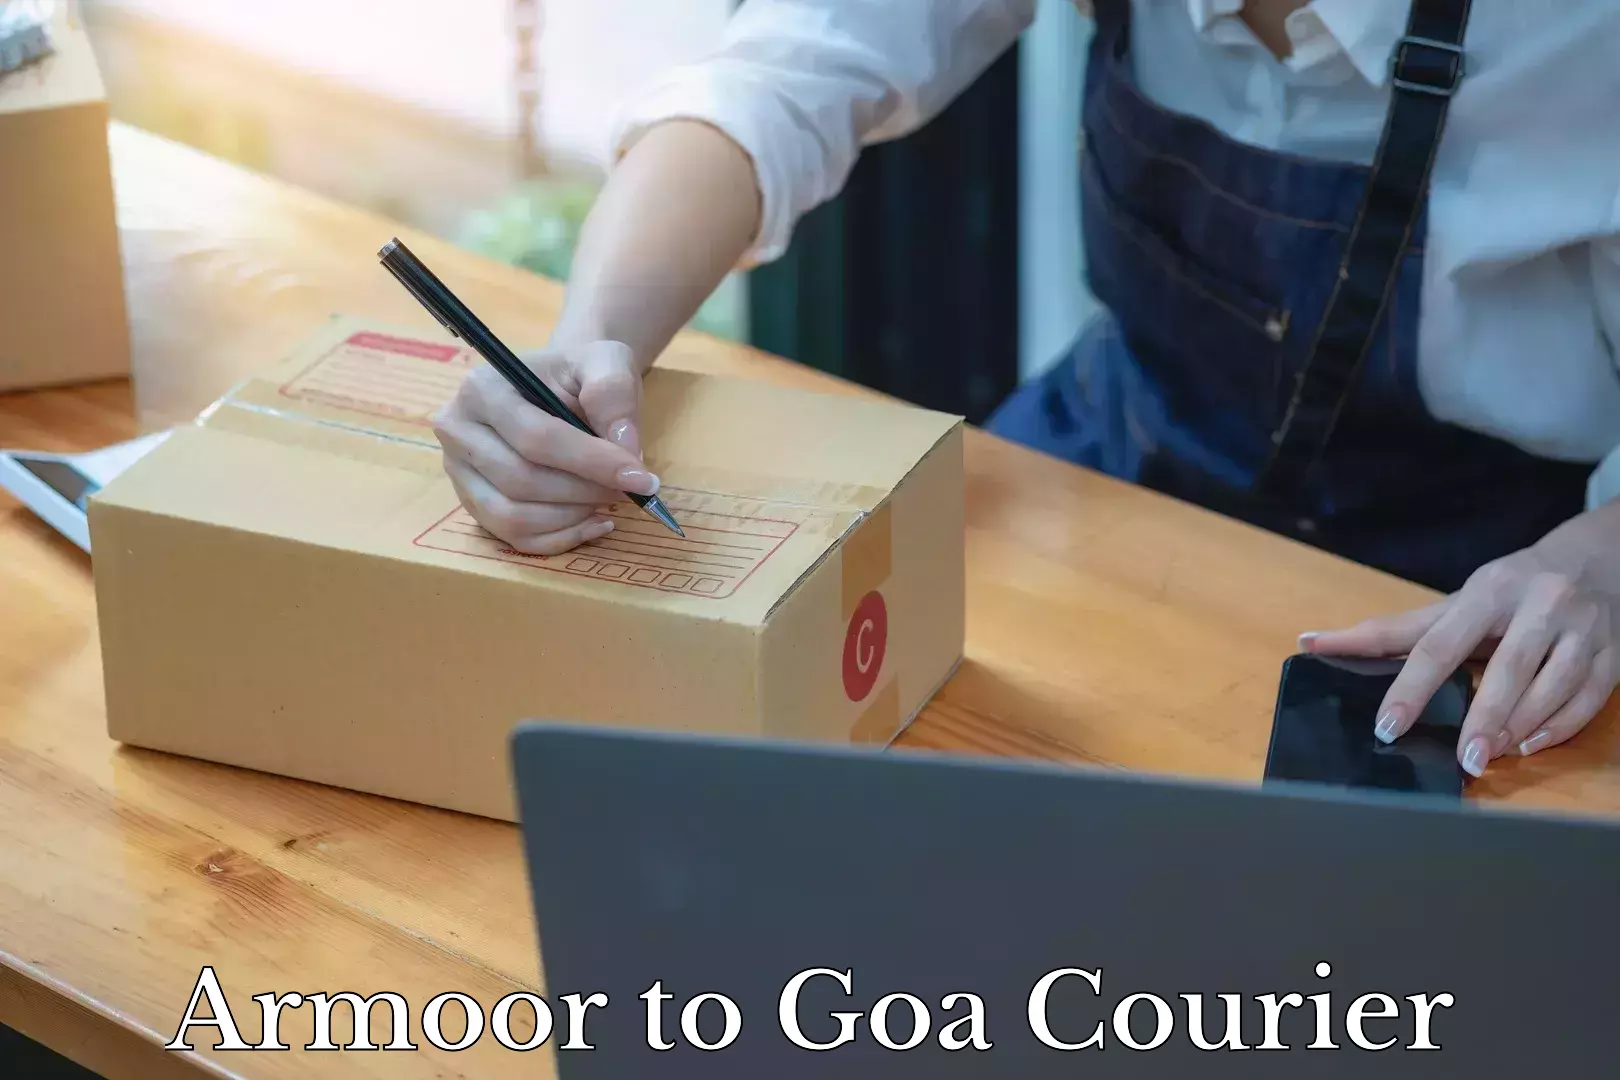 Furniture transport experts Armoor to Goa